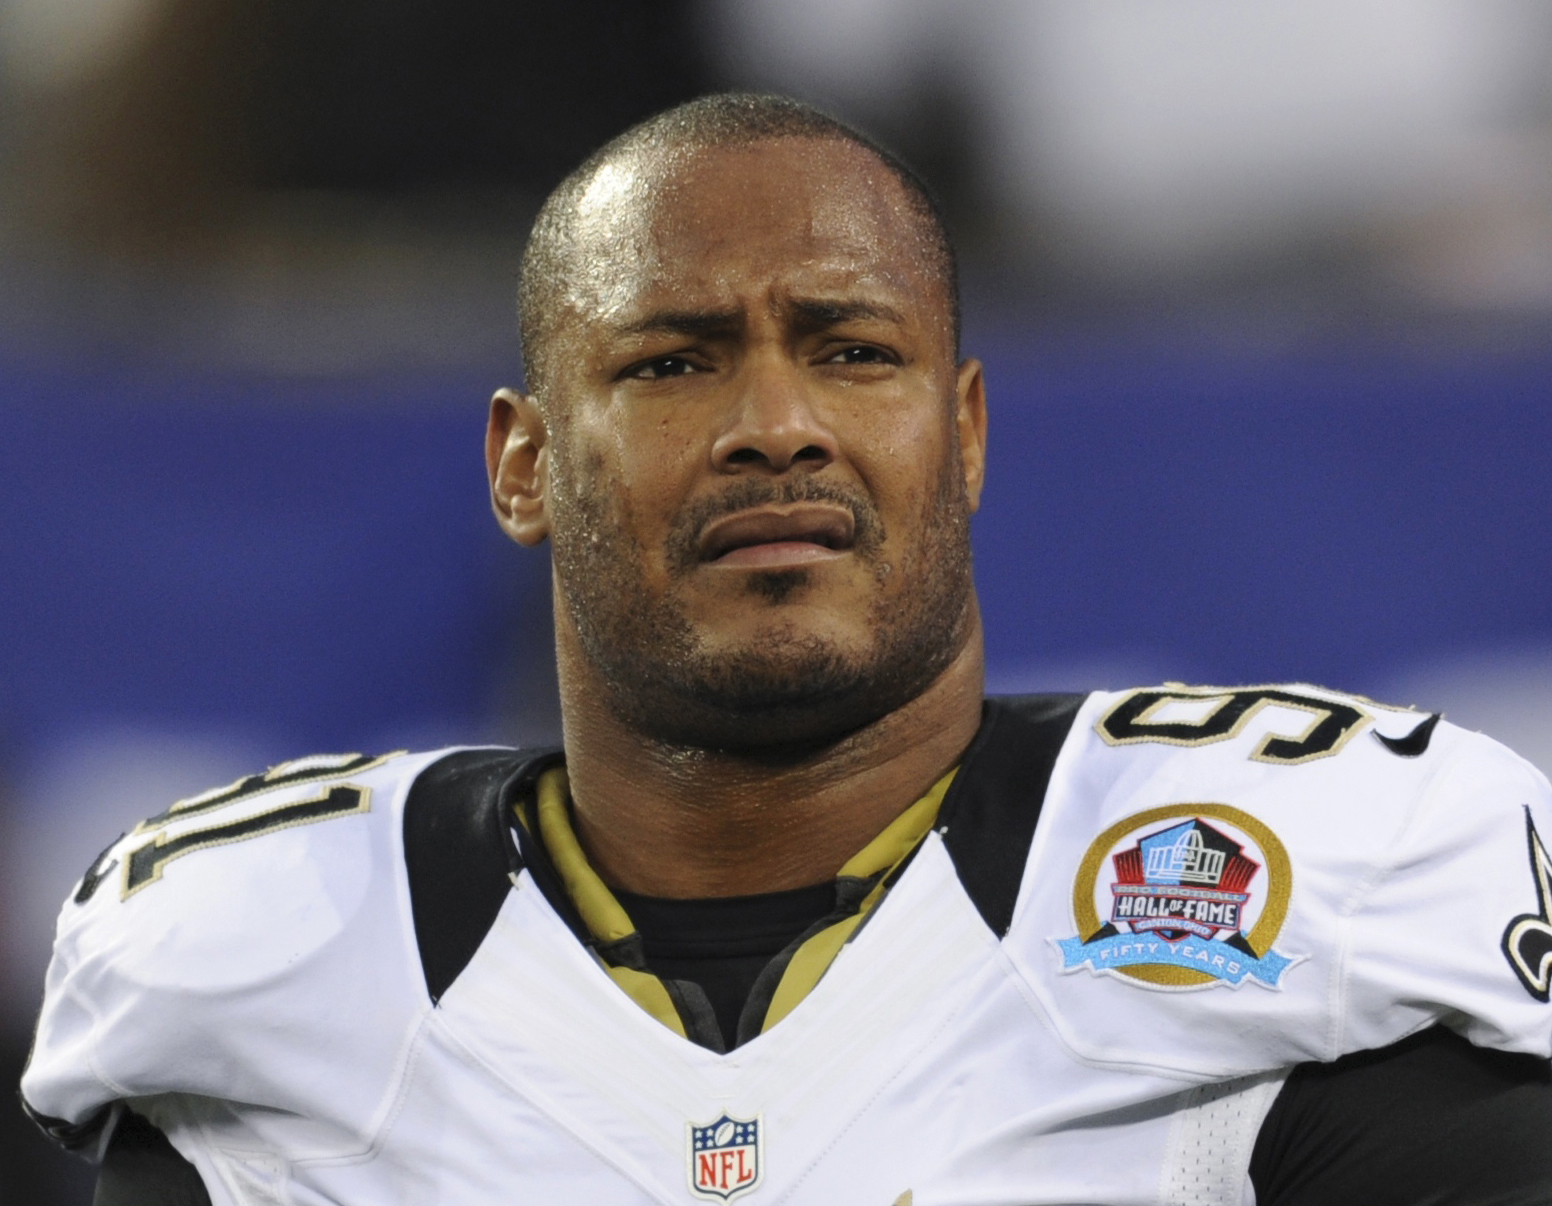 In this Dec. 9, 2012, file photo, New Orleans Saints defensive end Will Smith appears before an NFL football game. (Bill Kostroun&mdash;AP)